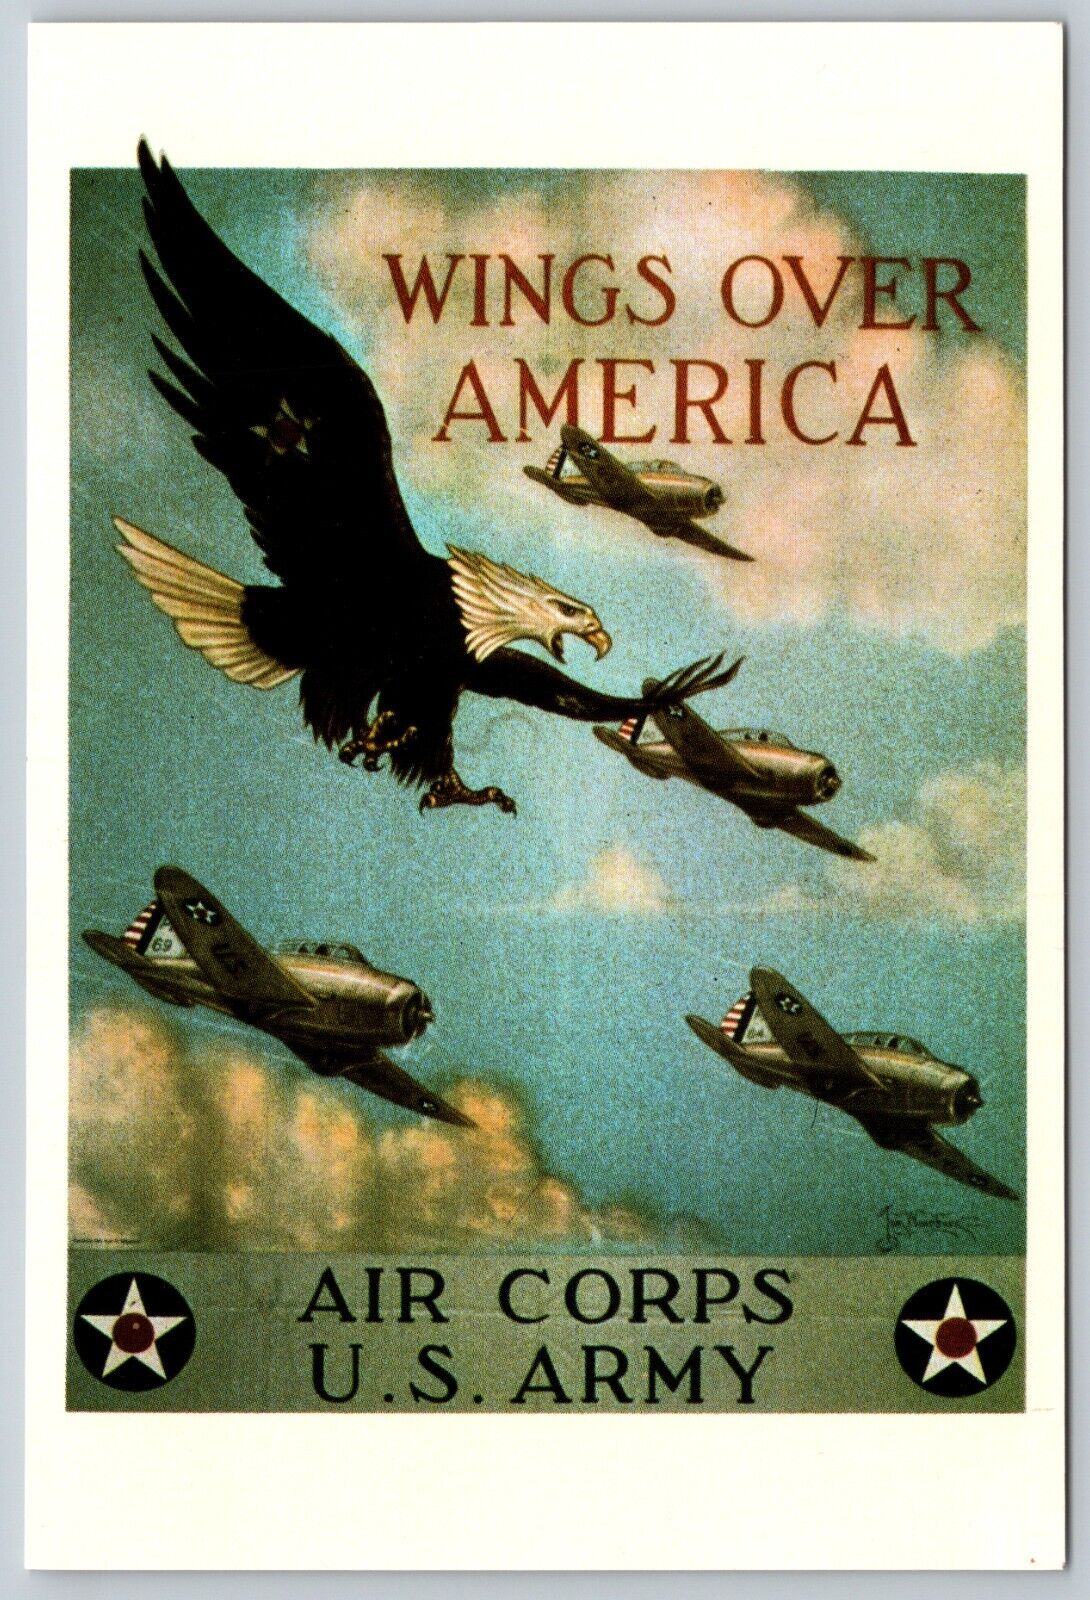 WINGS OVER AMERICA BY LT COL TOM B WOODBURN REPRO FAMOUS POSTER CHROME POSTCARD